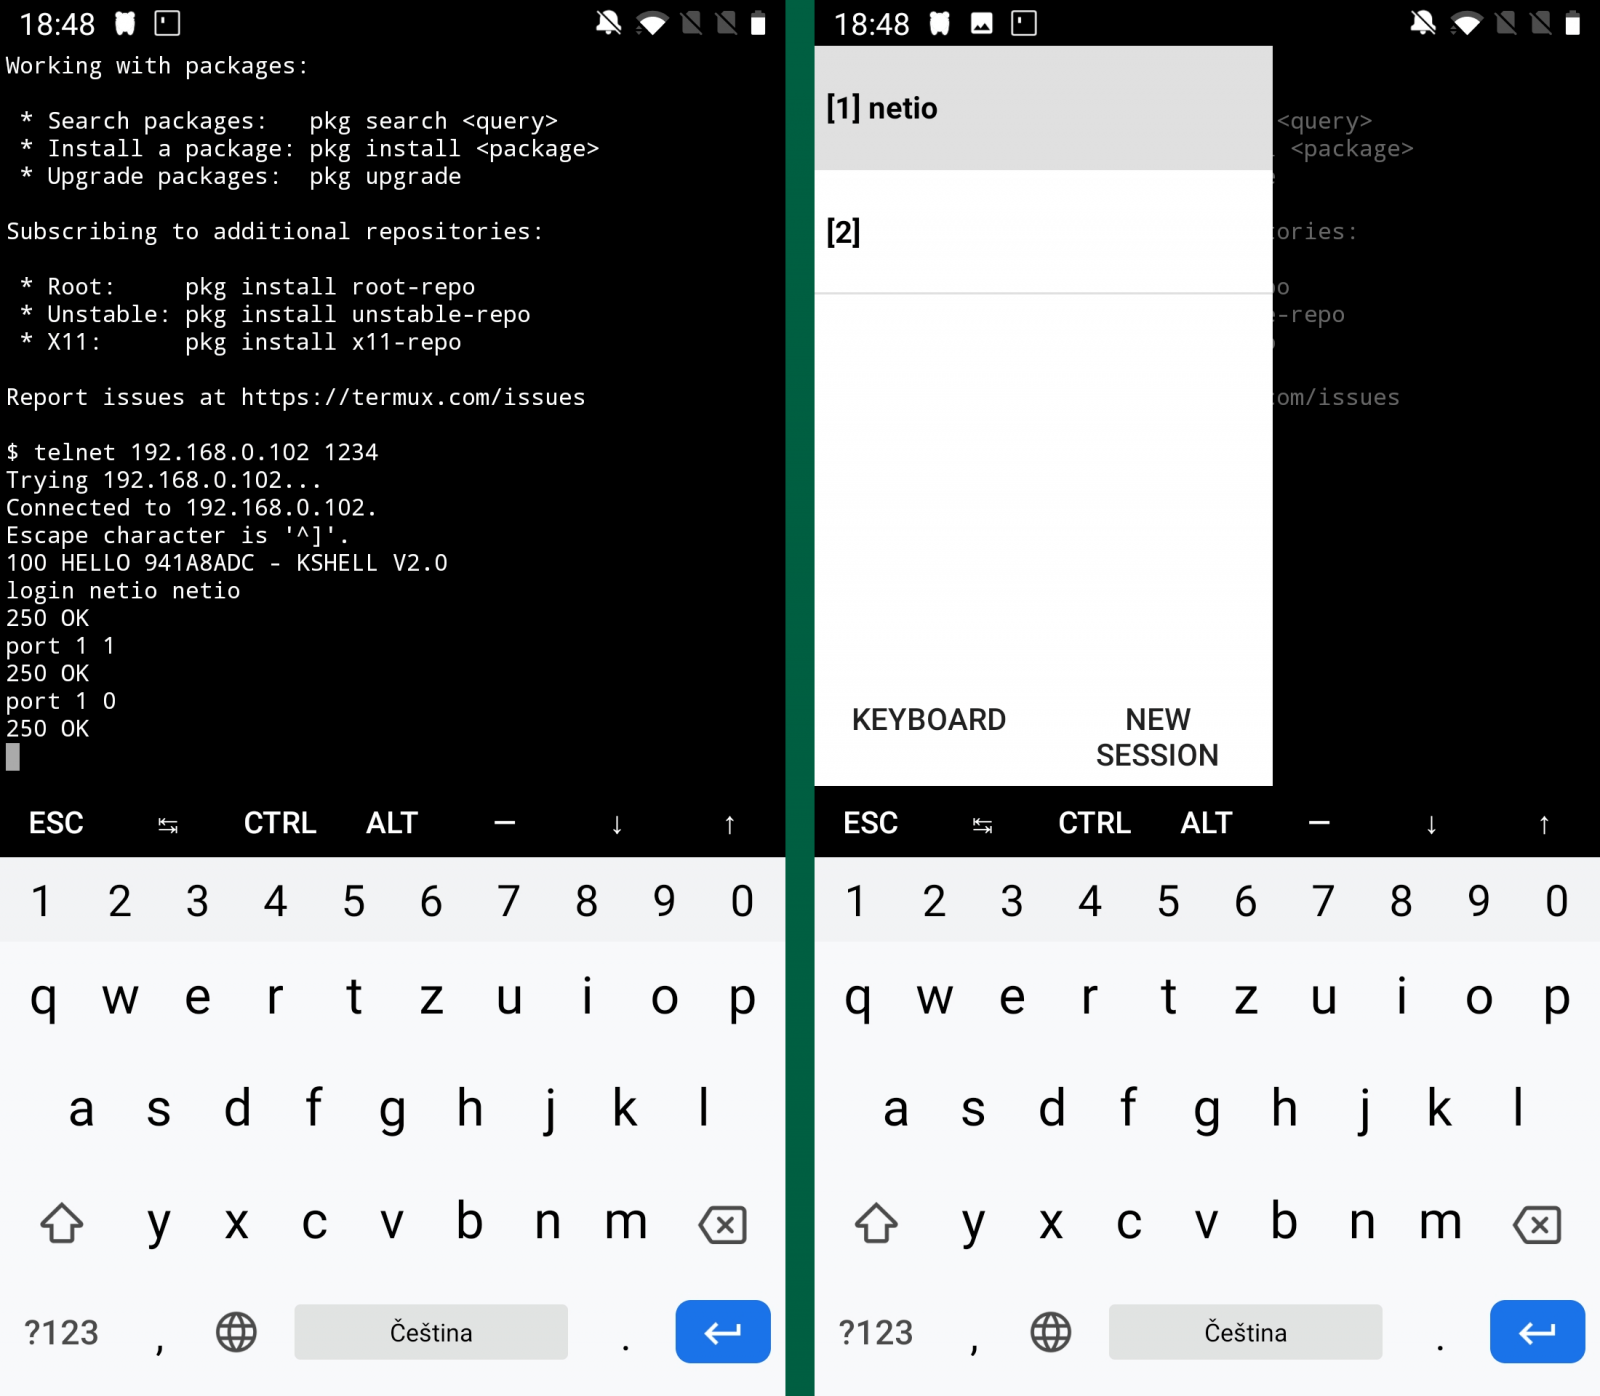 Screenshots of Termux, android app for controlling NETIO networked smart power sockets